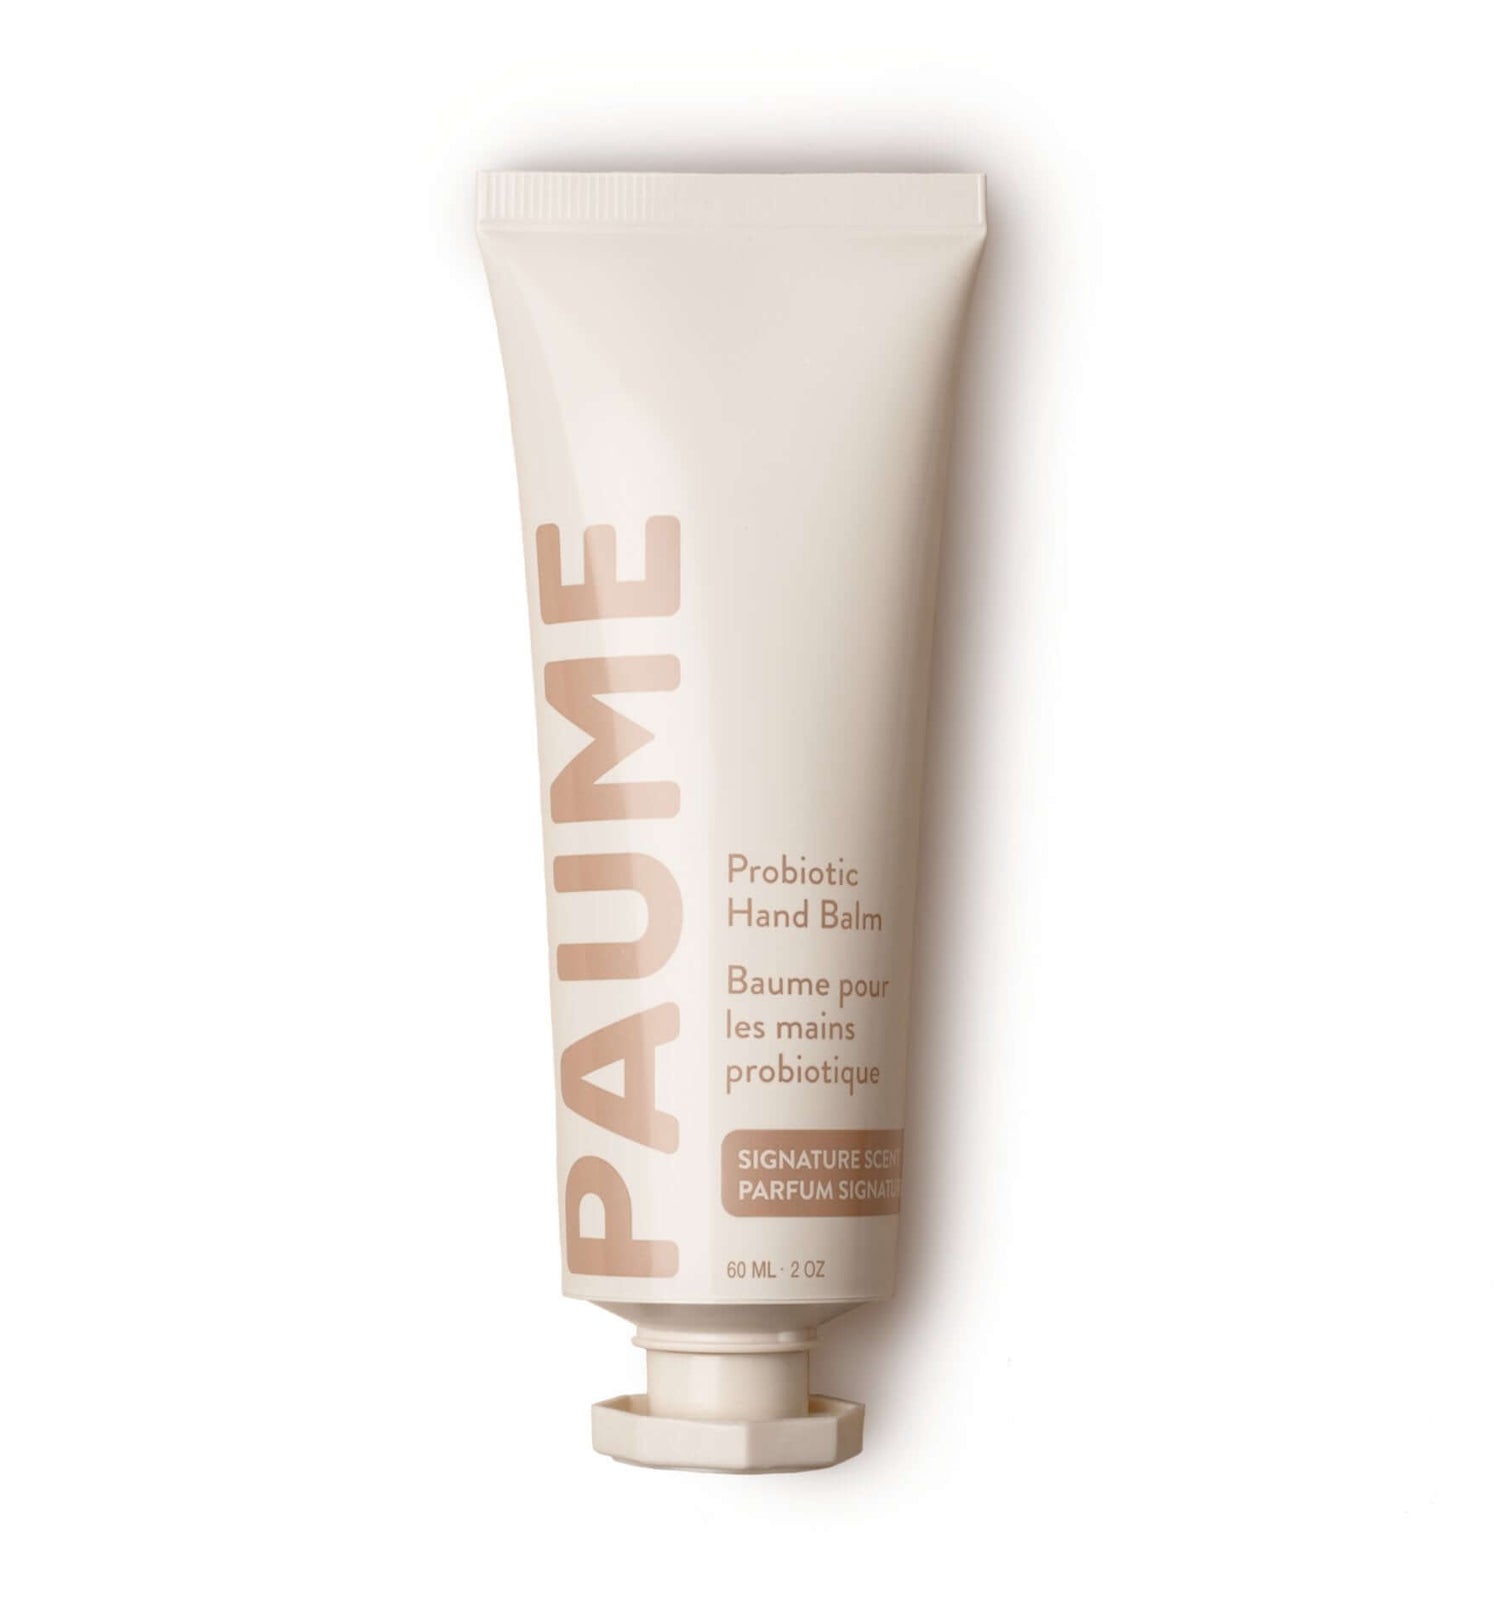 FREE Full-Sized Paume Probiotic Hand Balm Three Ships GWP Natural Vegan Cruelty-free Skincare